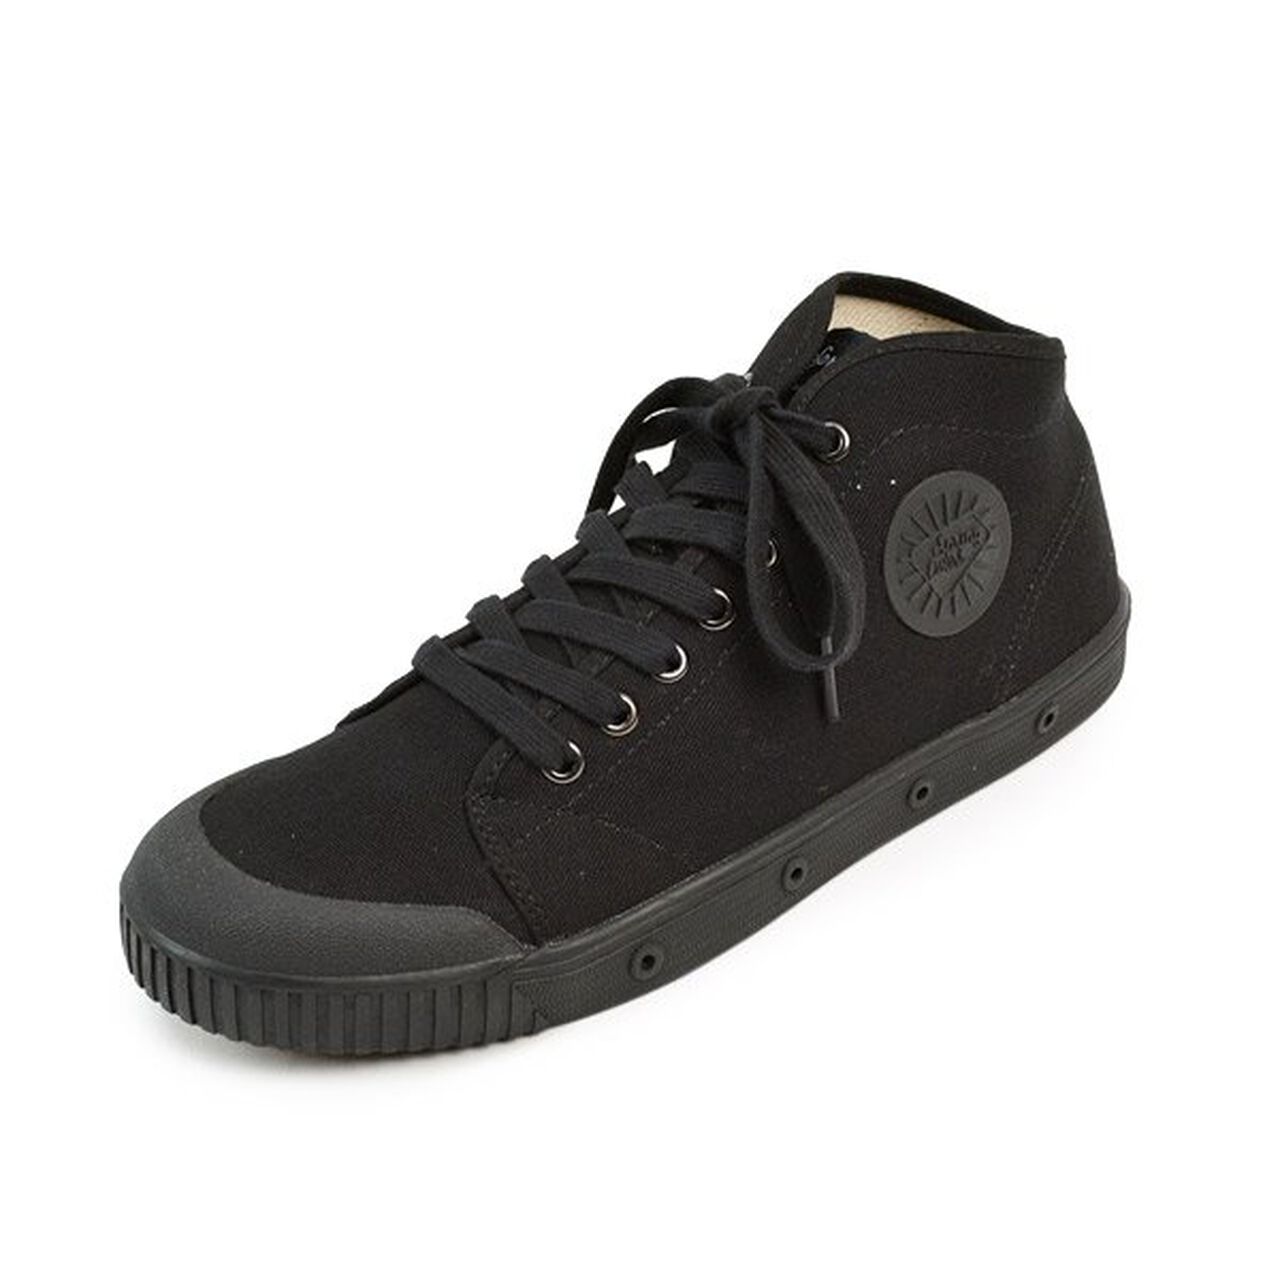 B2 Mid Cut Canvas Sneakers,Black, large image number 0